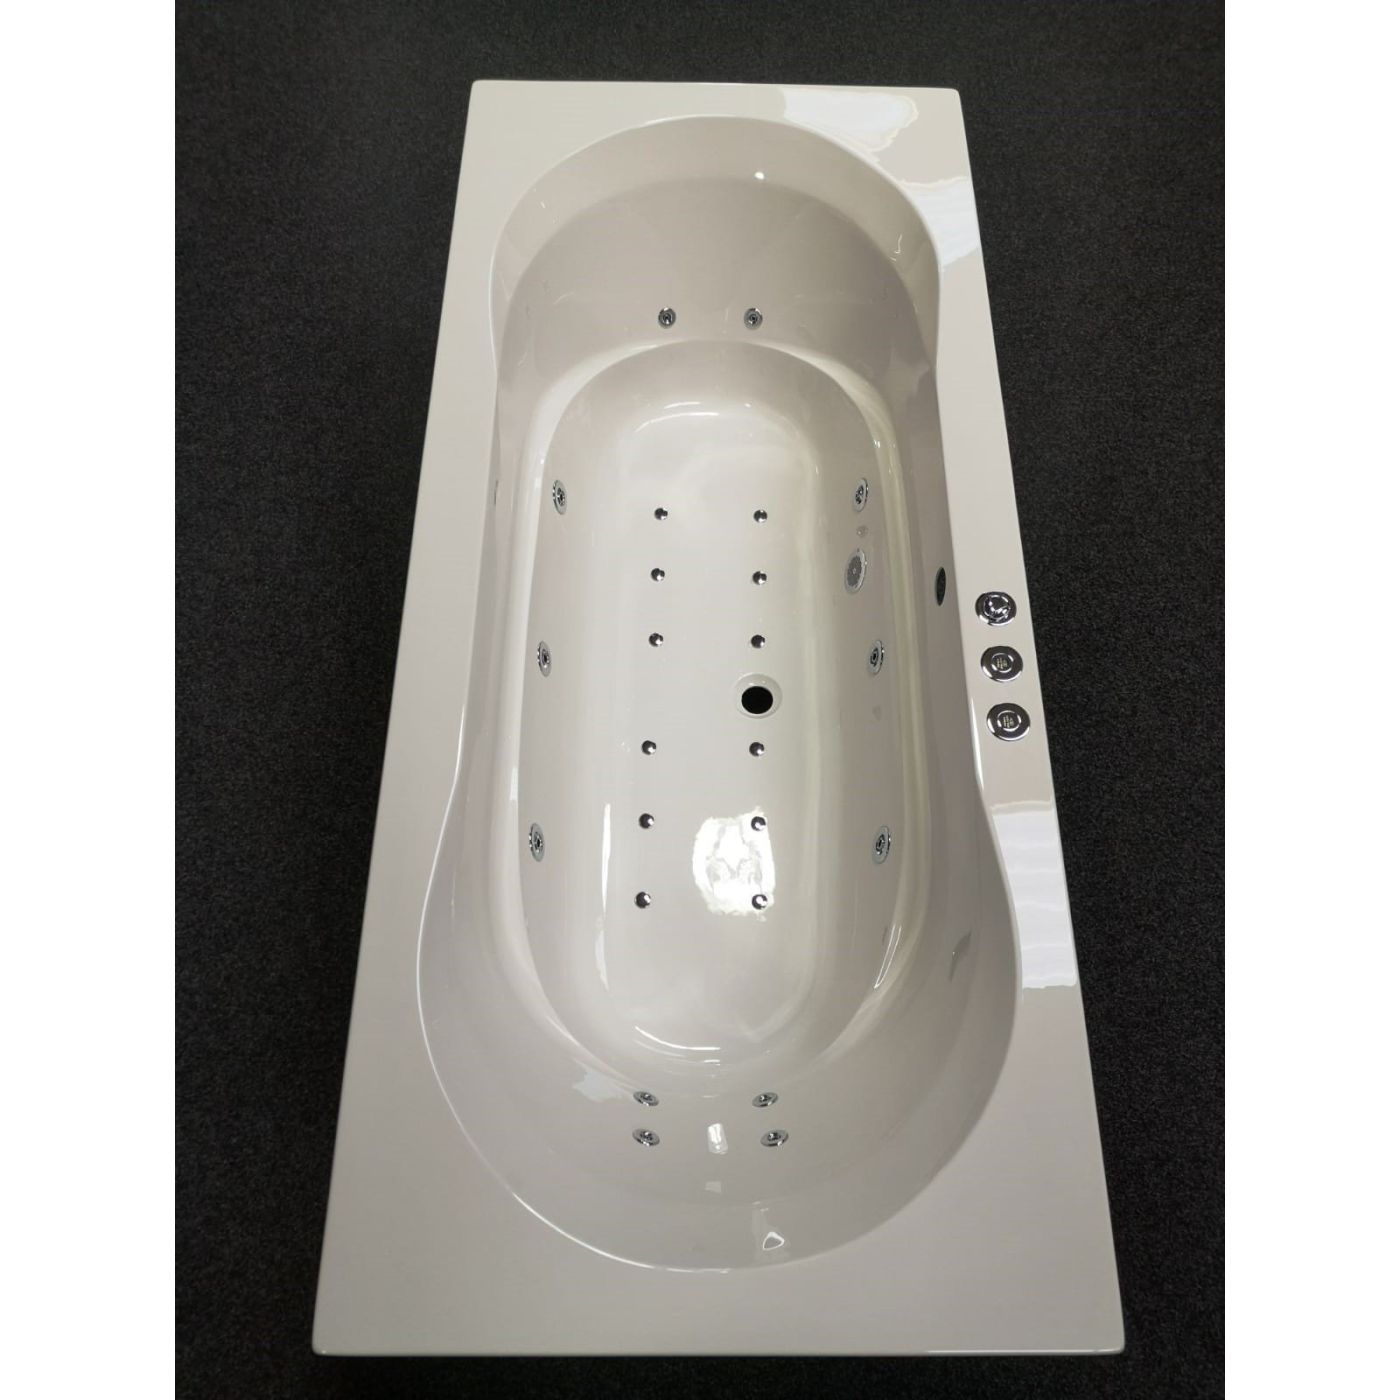 Xenz Martinique bubbelbad met Koller WP3 systeem 180x80 wit